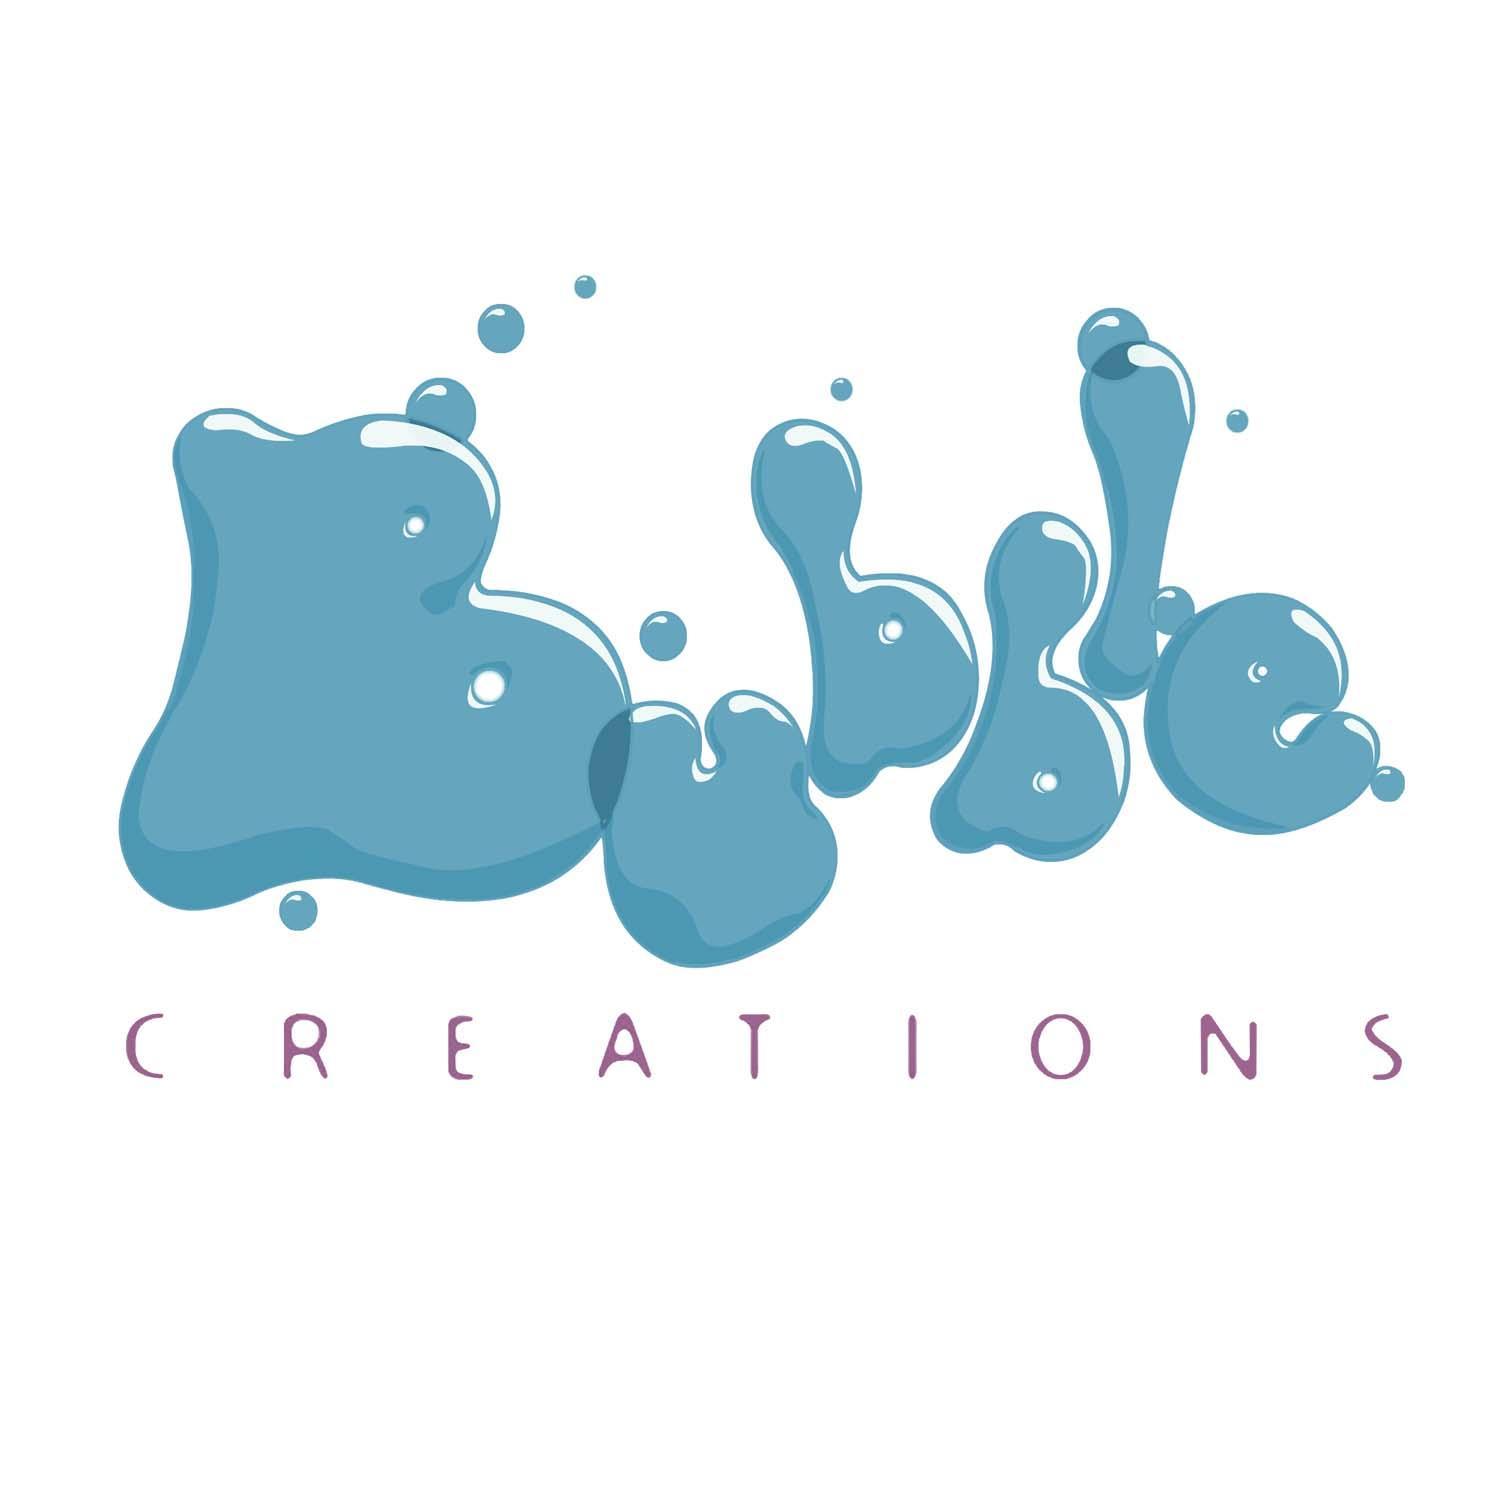 Bubble Creations is a young growing Studio that specializes in 2D visual effects for films, television, and other media services.